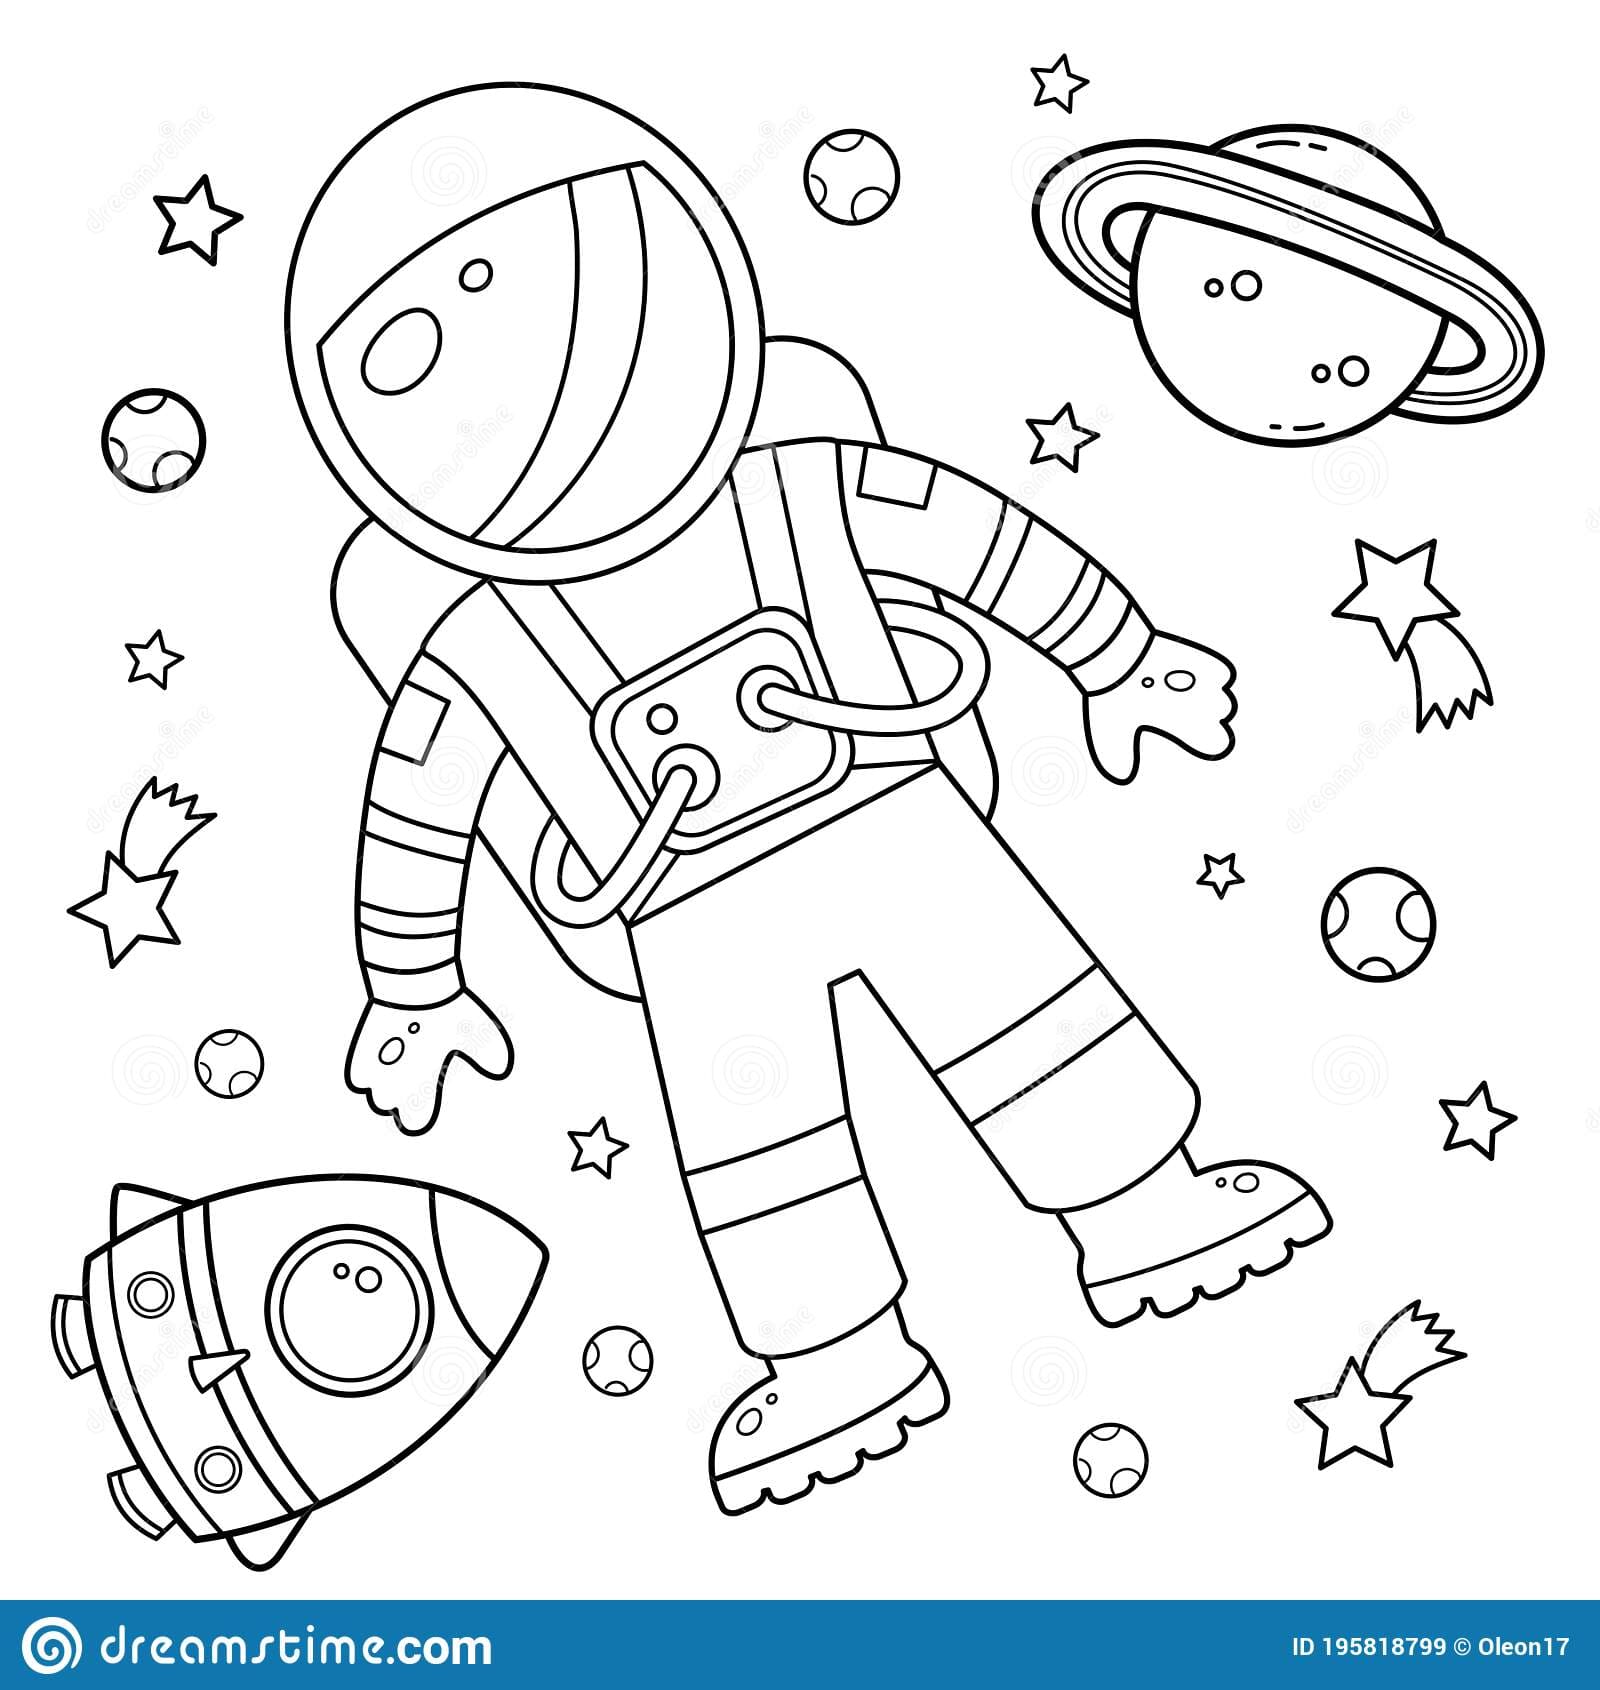 Coloring Page Outline Of a cartoon rocket With Astronaut in space